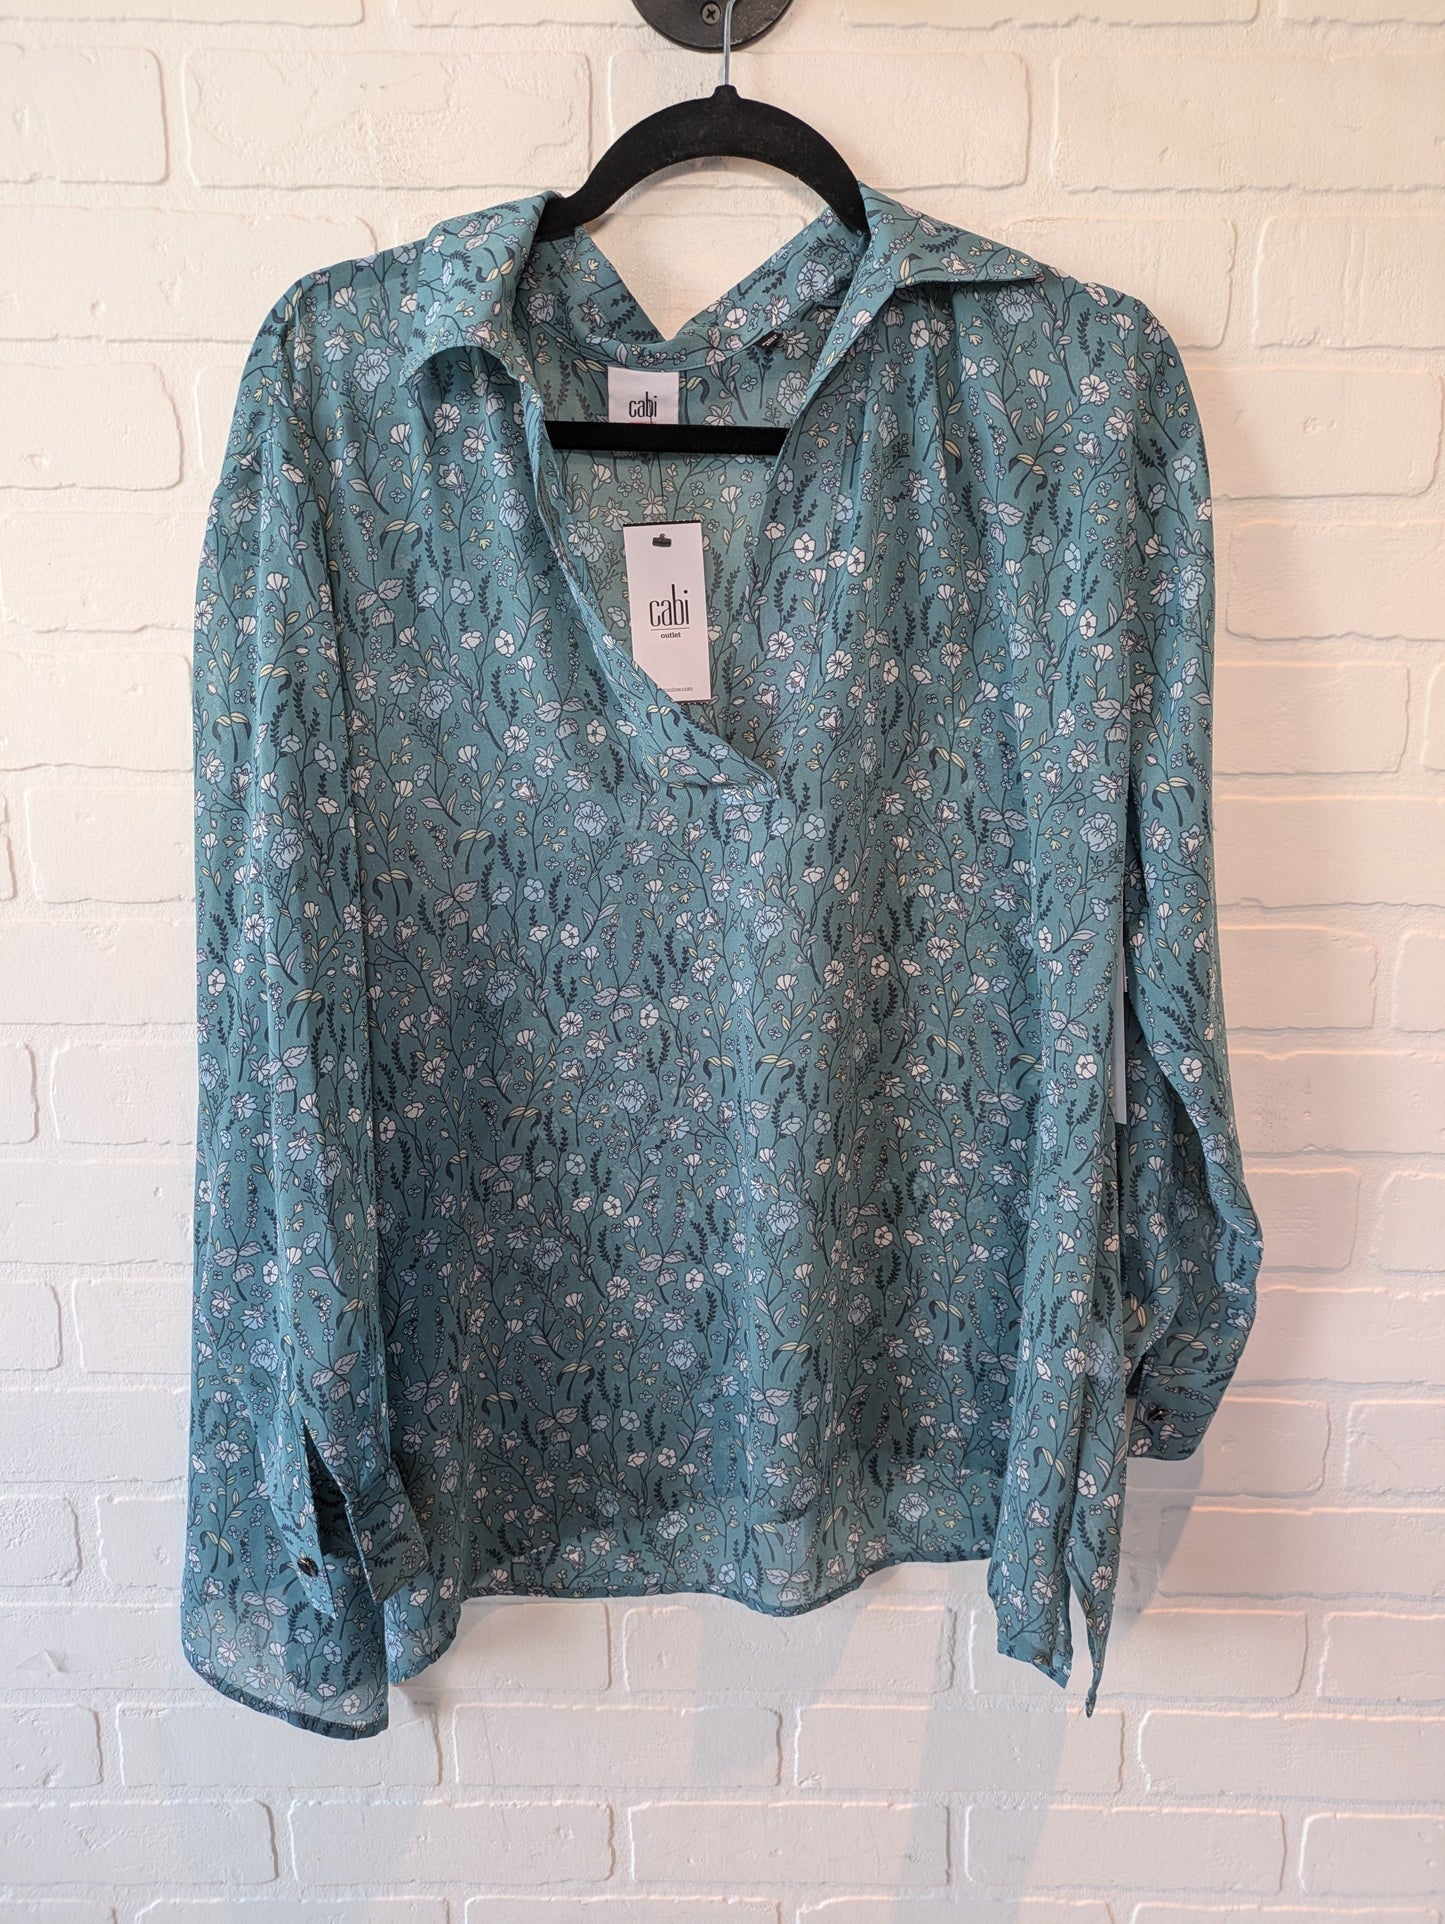 Blue Top Long Sleeve Cabi, Size S